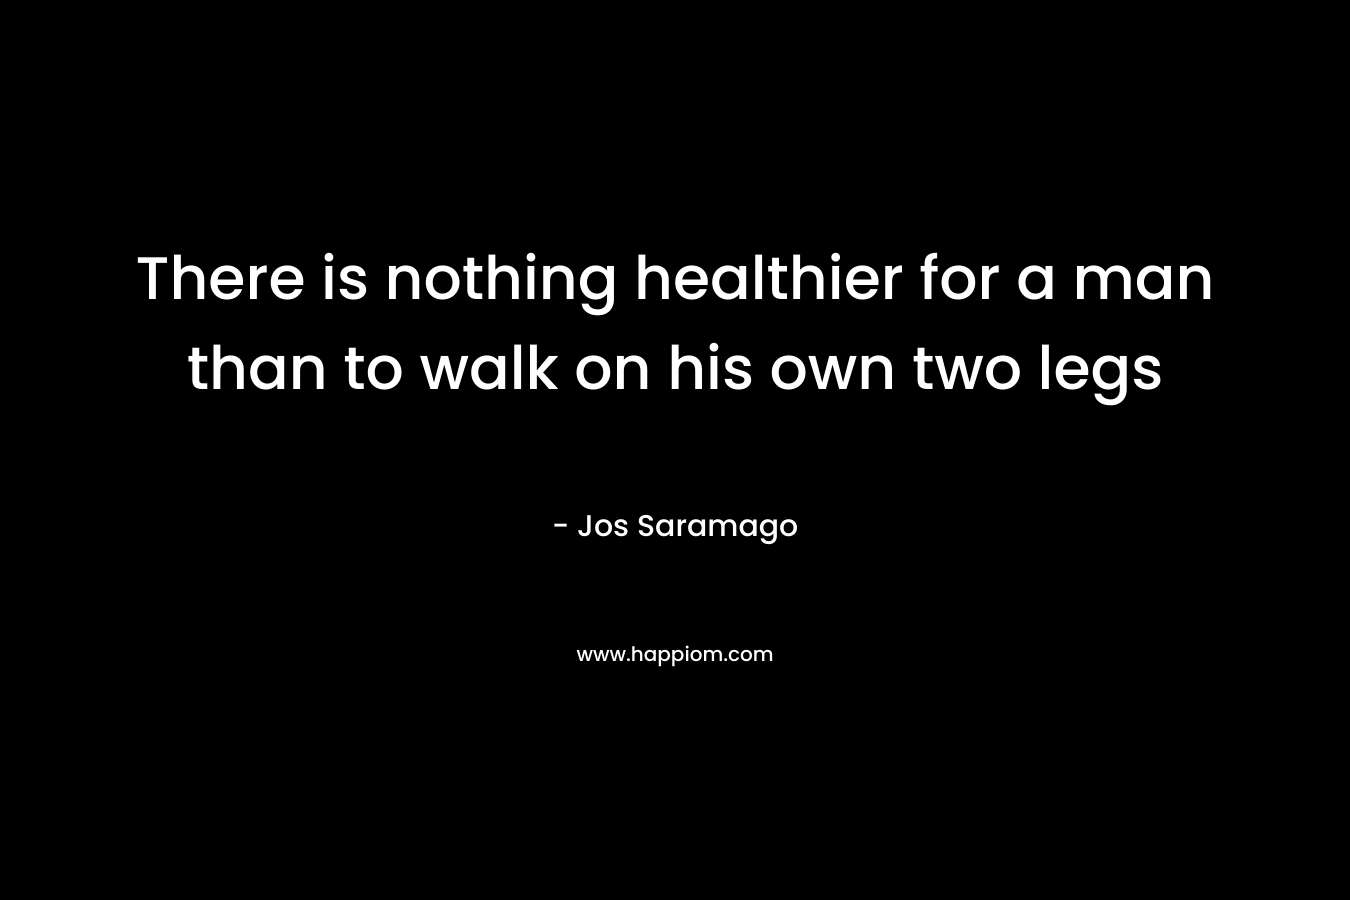 There is nothing healthier for a man than to walk on his own two legs